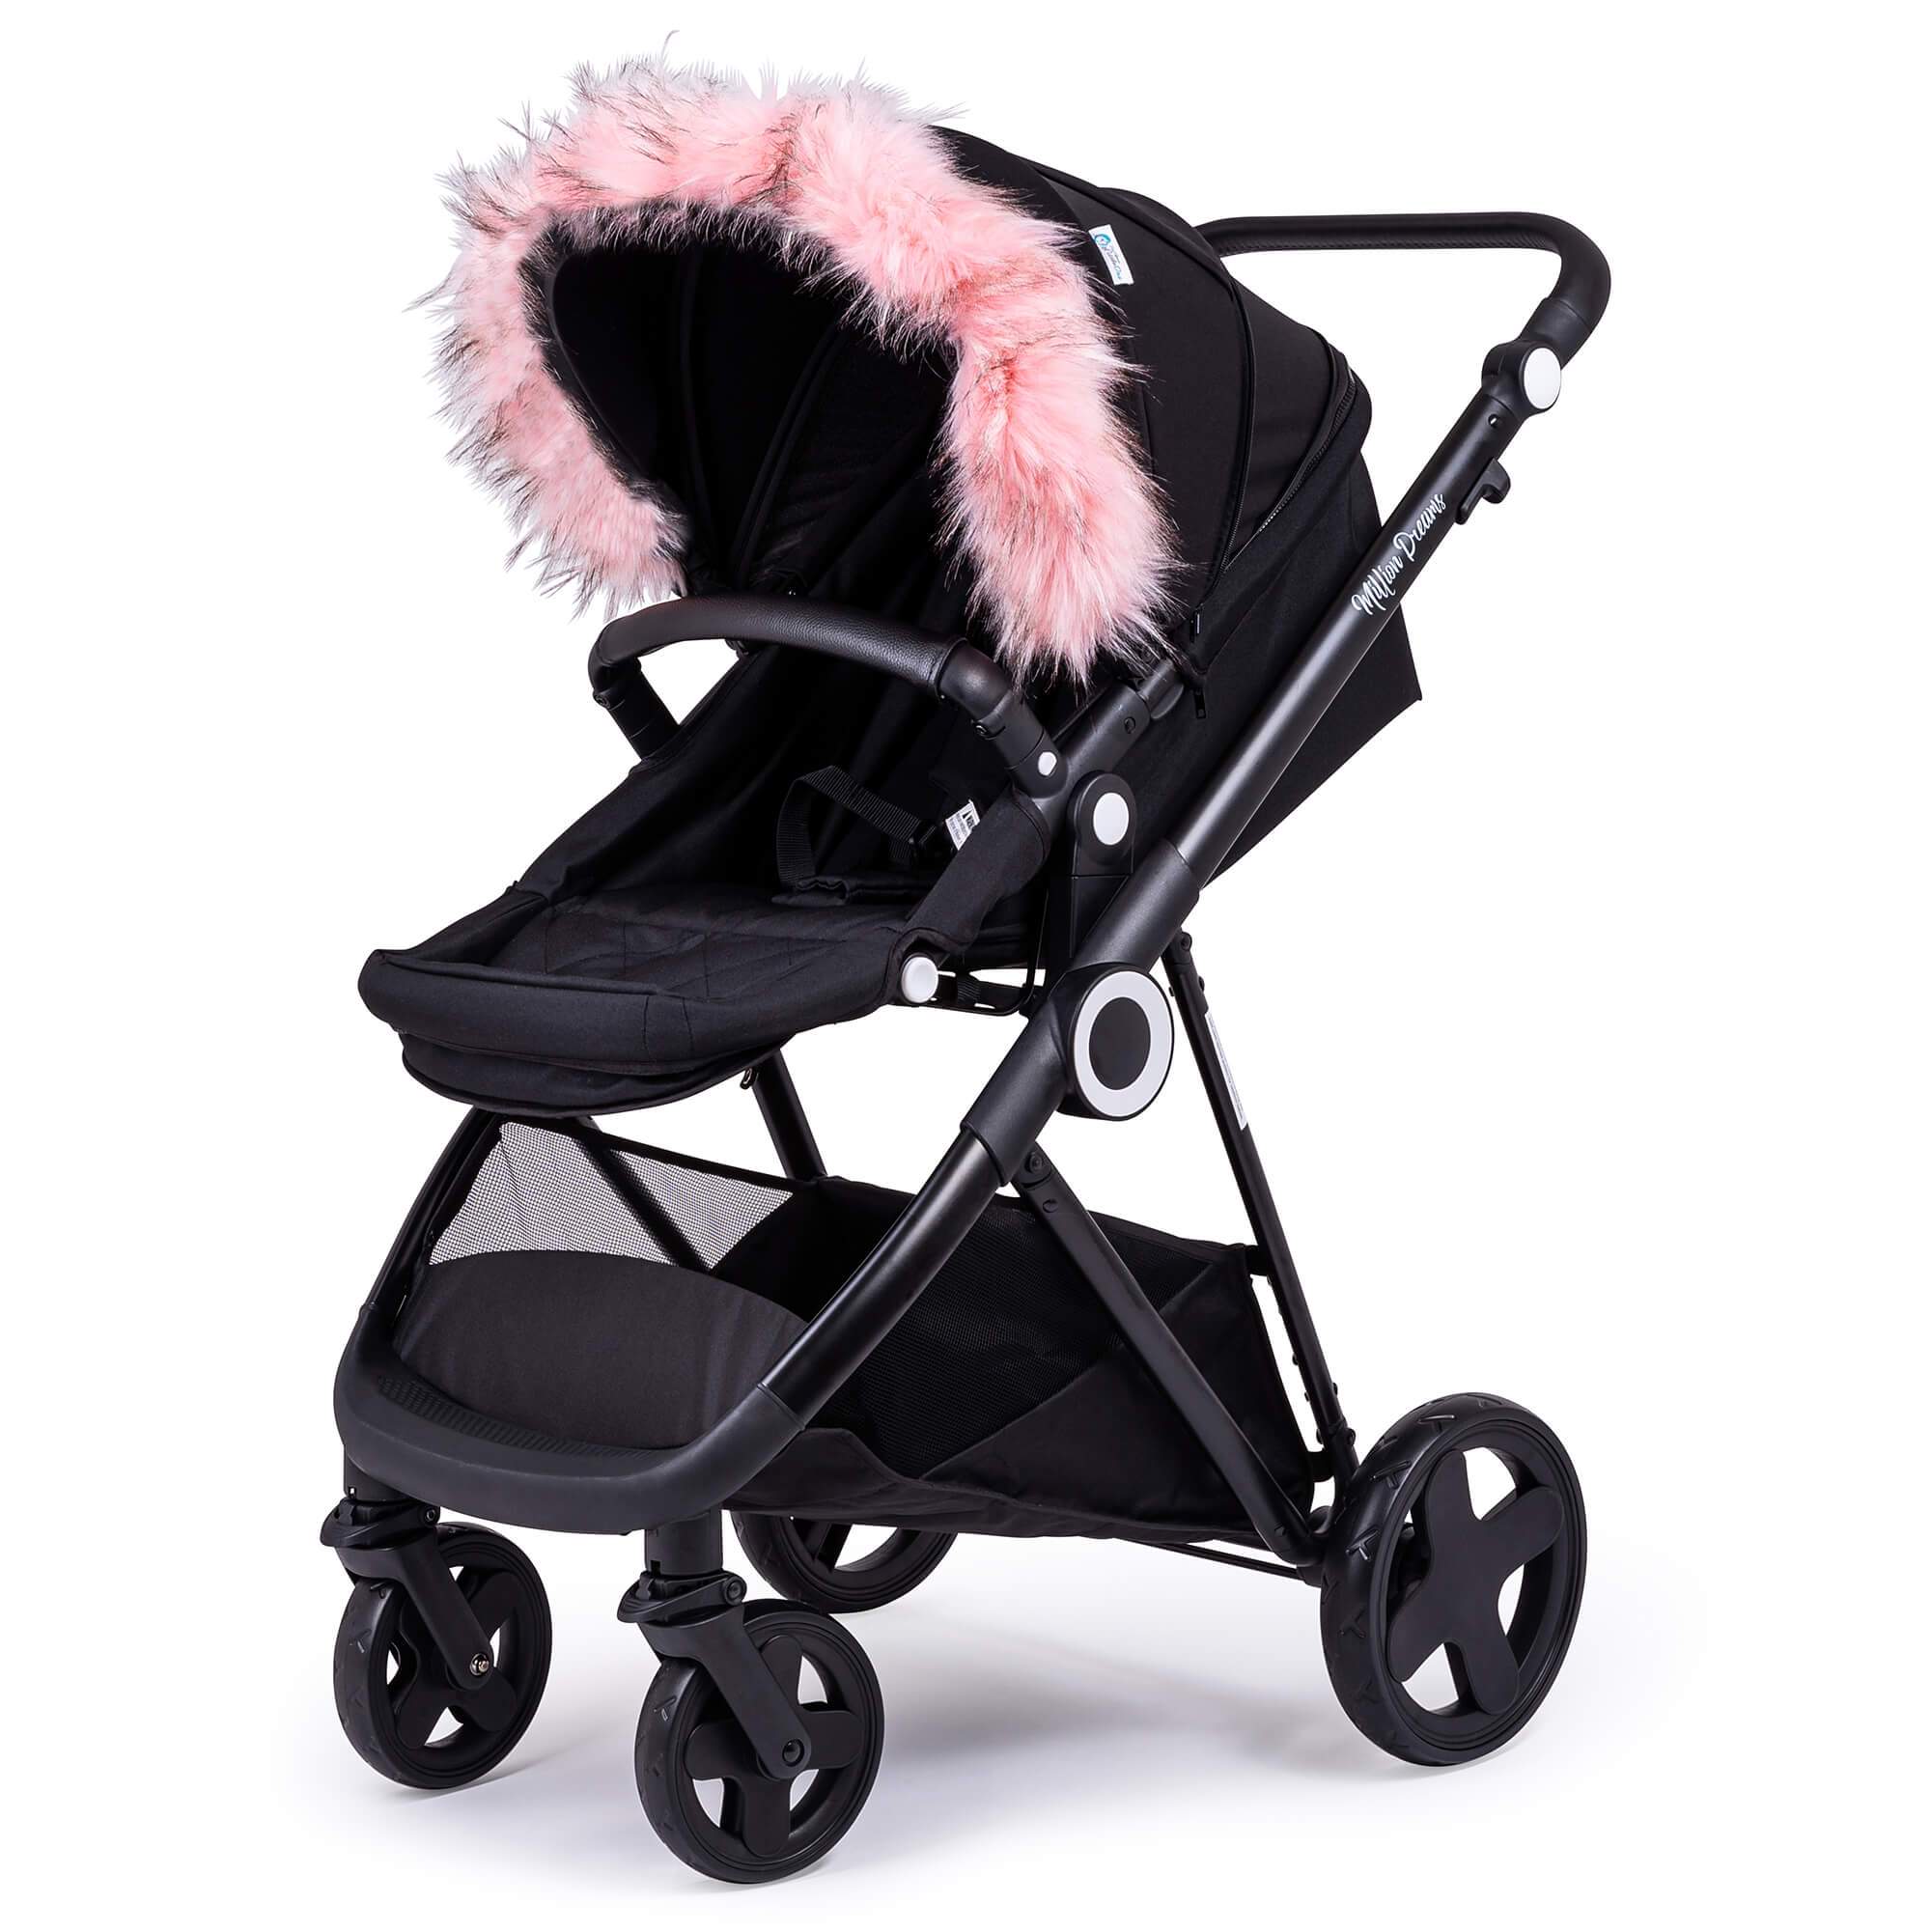 Pram Fur Hood Trim Attachment for Pushchair Compatible with ABC Design - For Your Little One